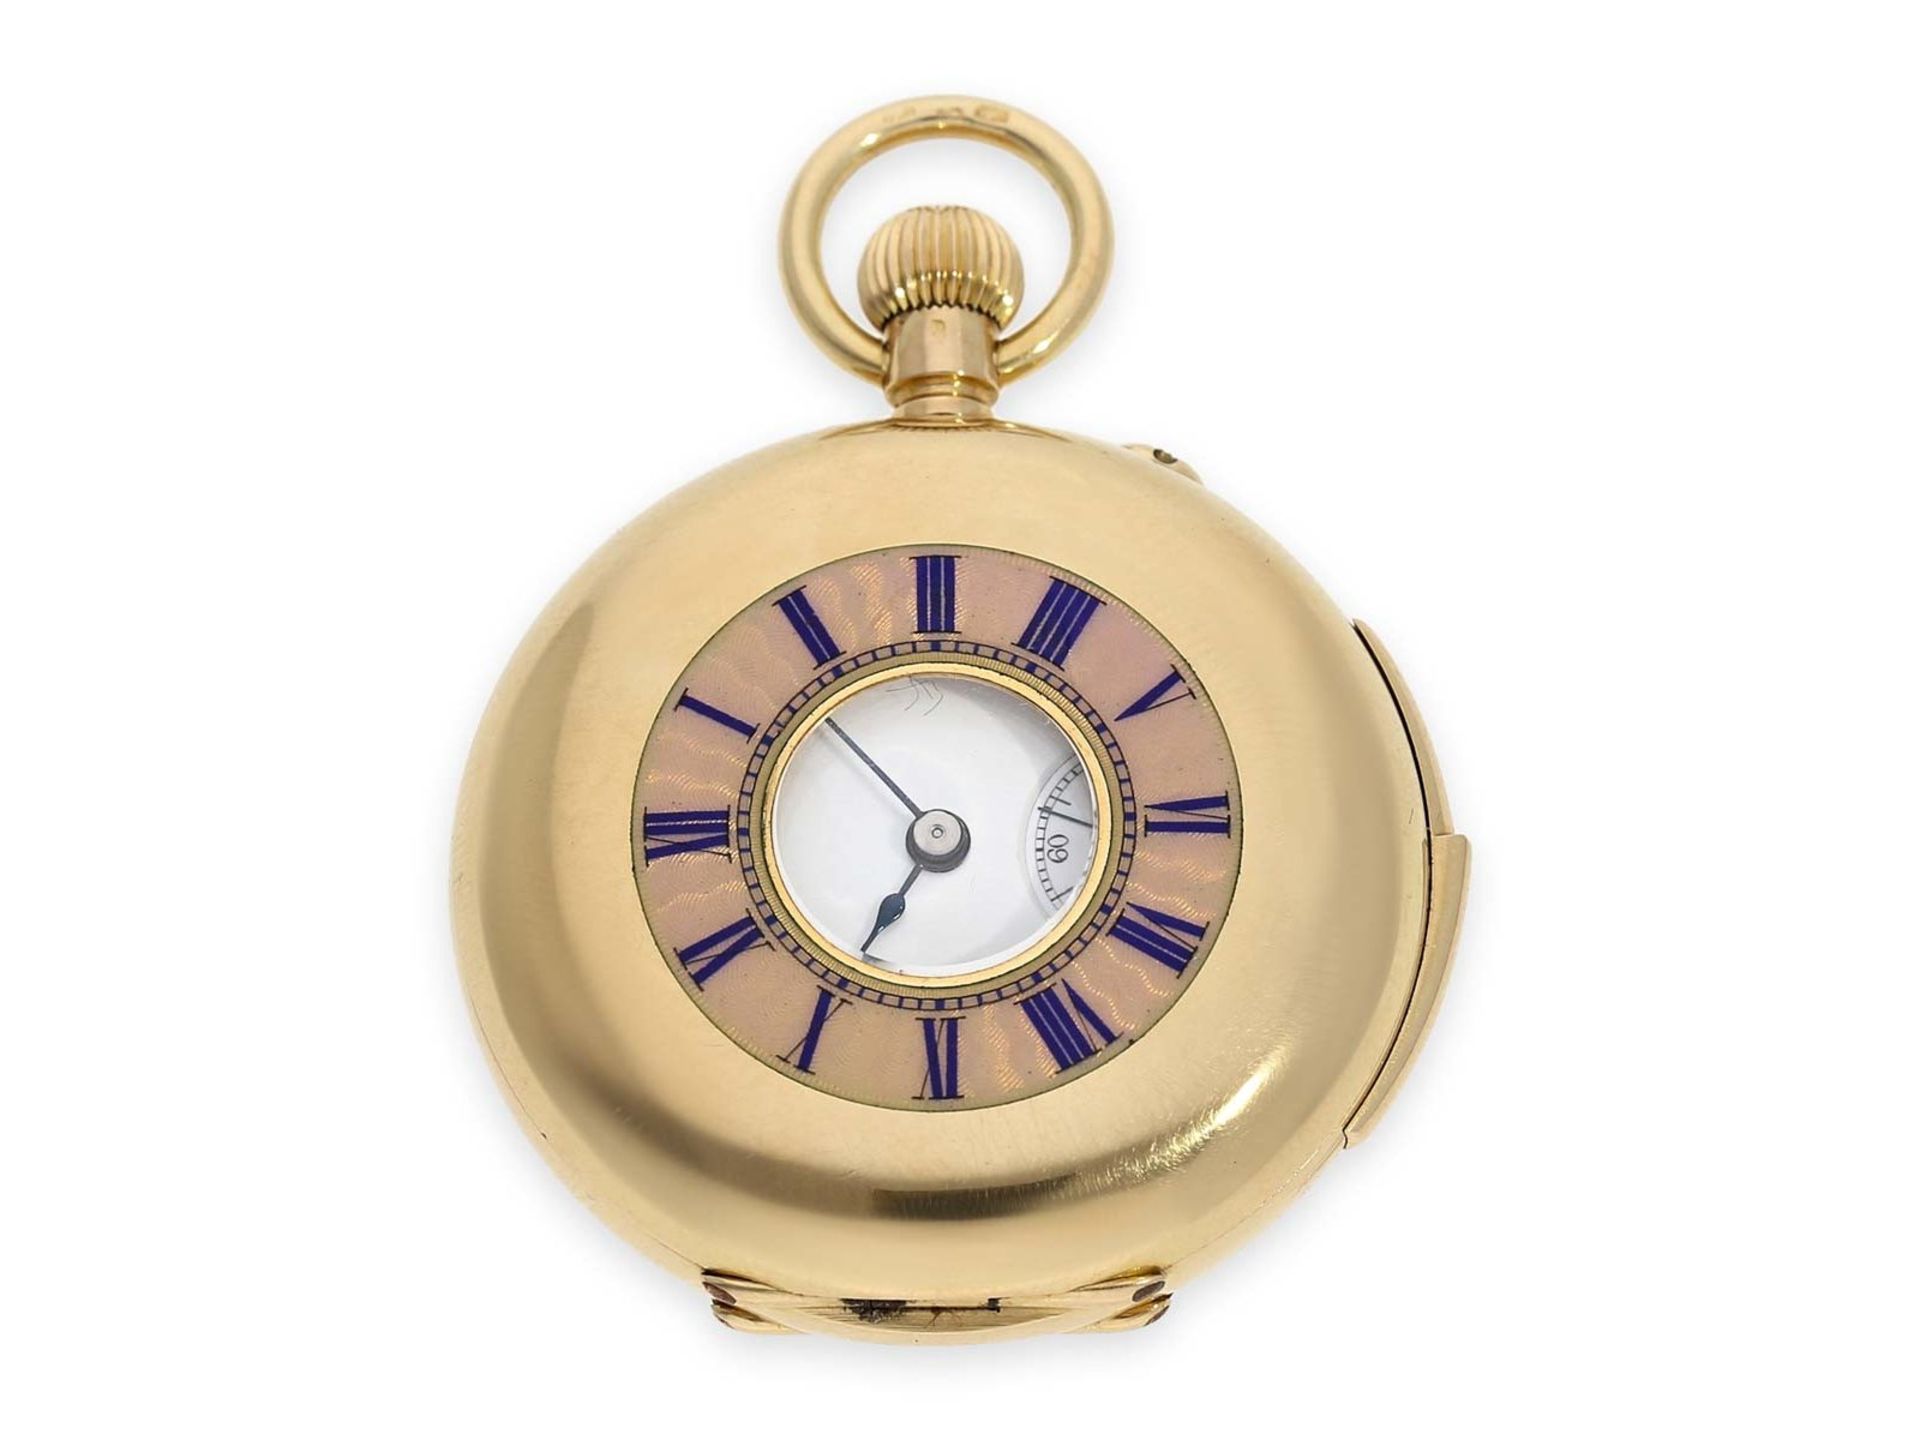 Pocket watch: exquisite gold/ enamel lady's half hunting case repeater with precision lever